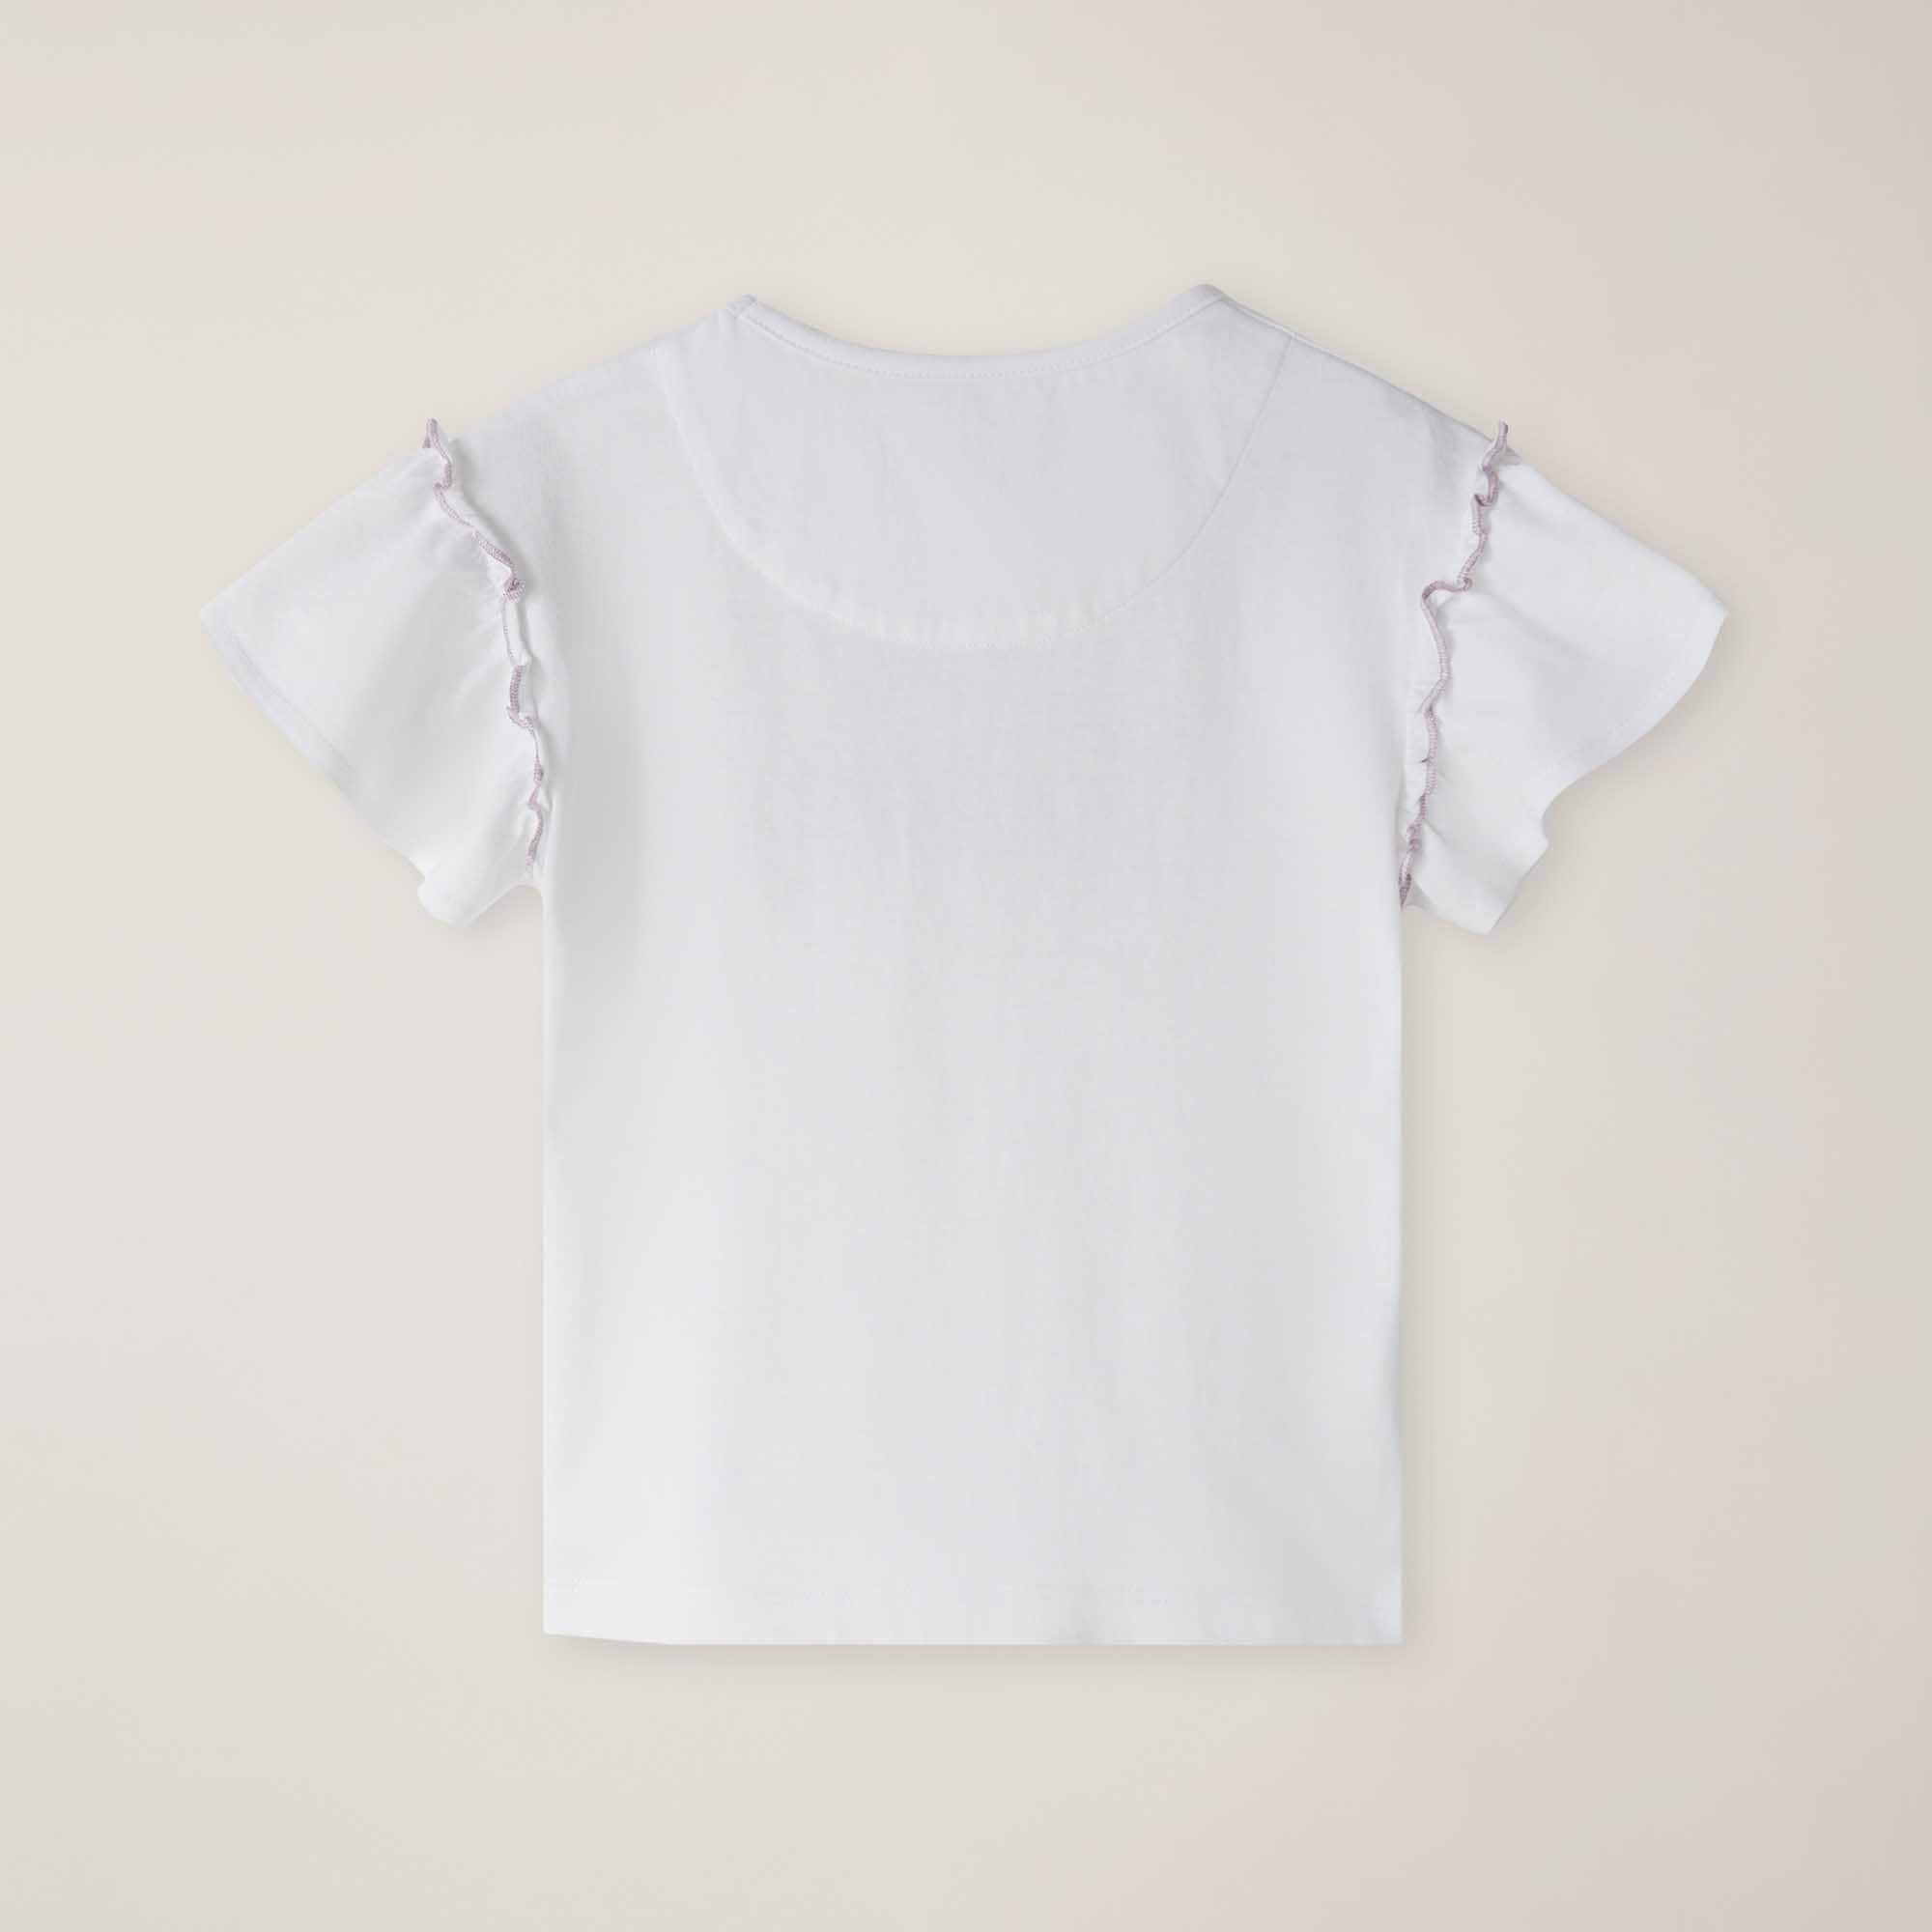 T-shirt decorated with pearls